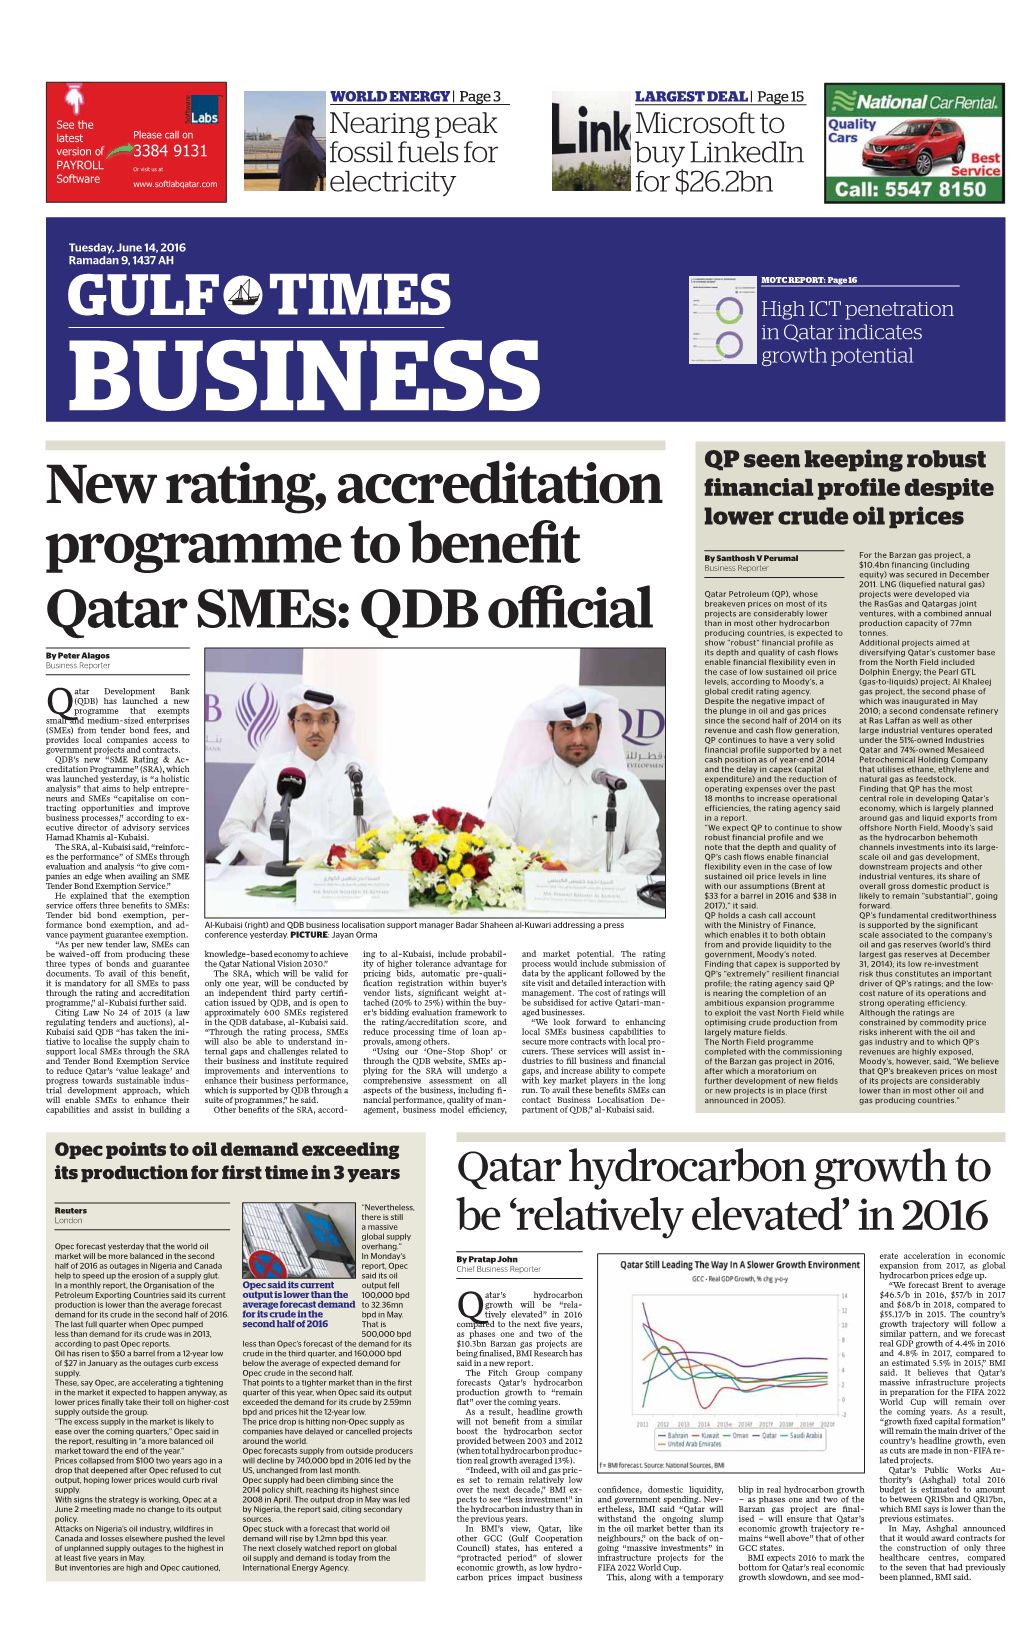 GULF TIMES New Rating, Accreditation Programme to Benefit Qatar Smes